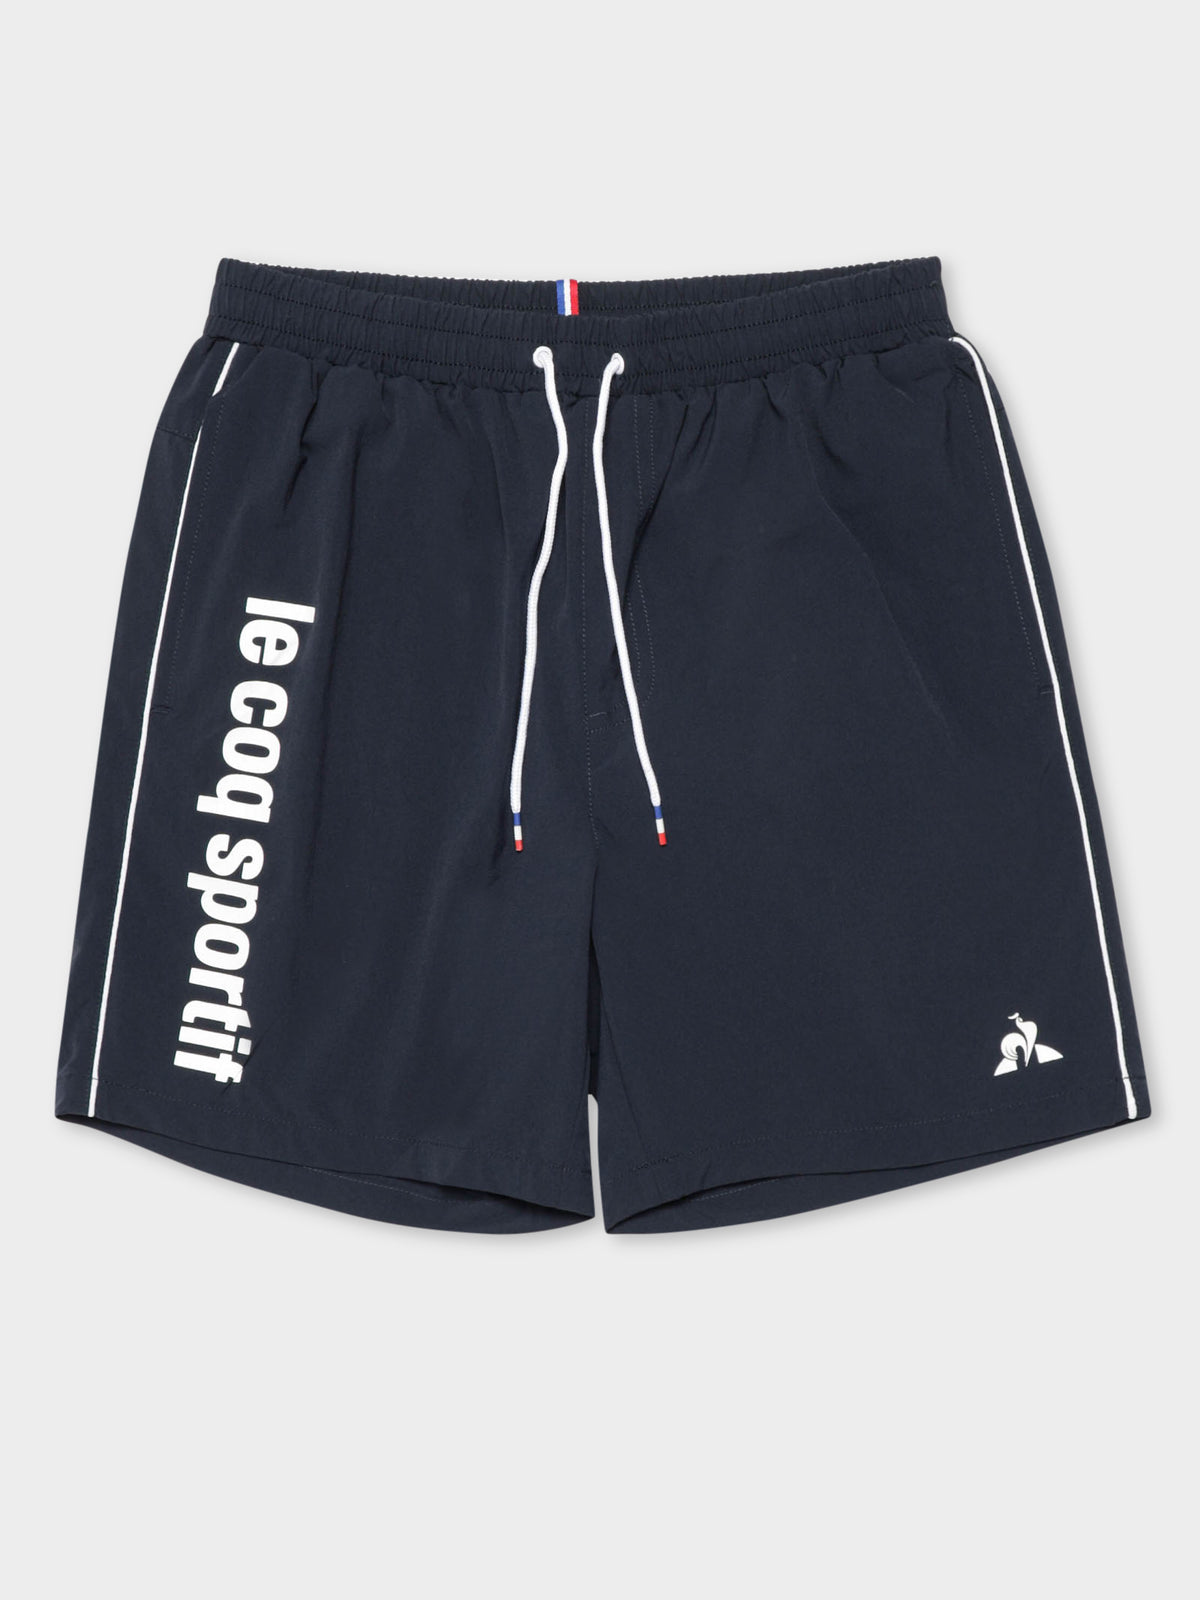 Concurrent Shorts in Dress Blue